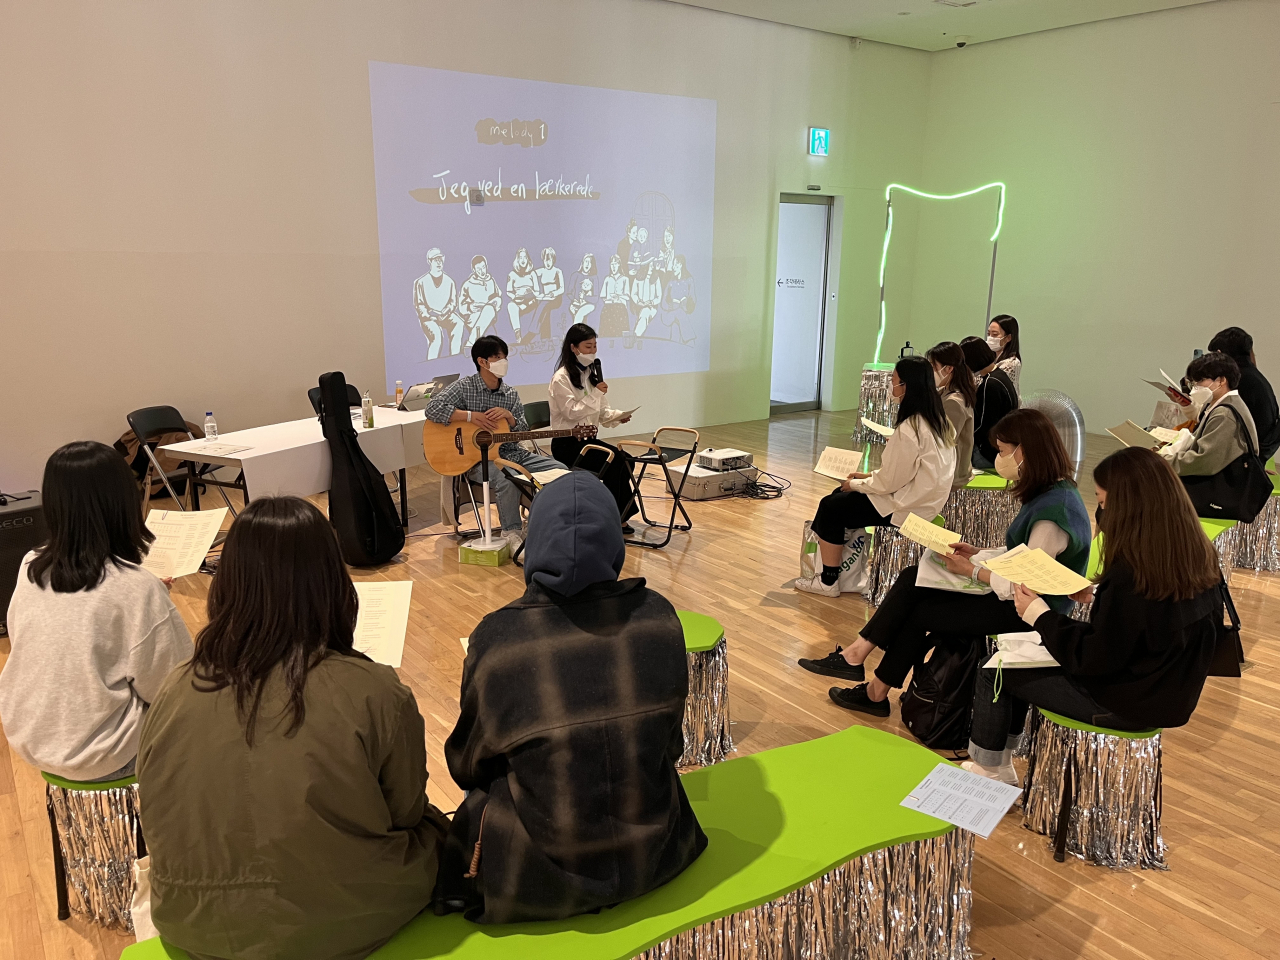 A group of people participate in a sing-along at Buk Seoul Museum of Art on Oct. 28, 2022. (Lee Hannah)